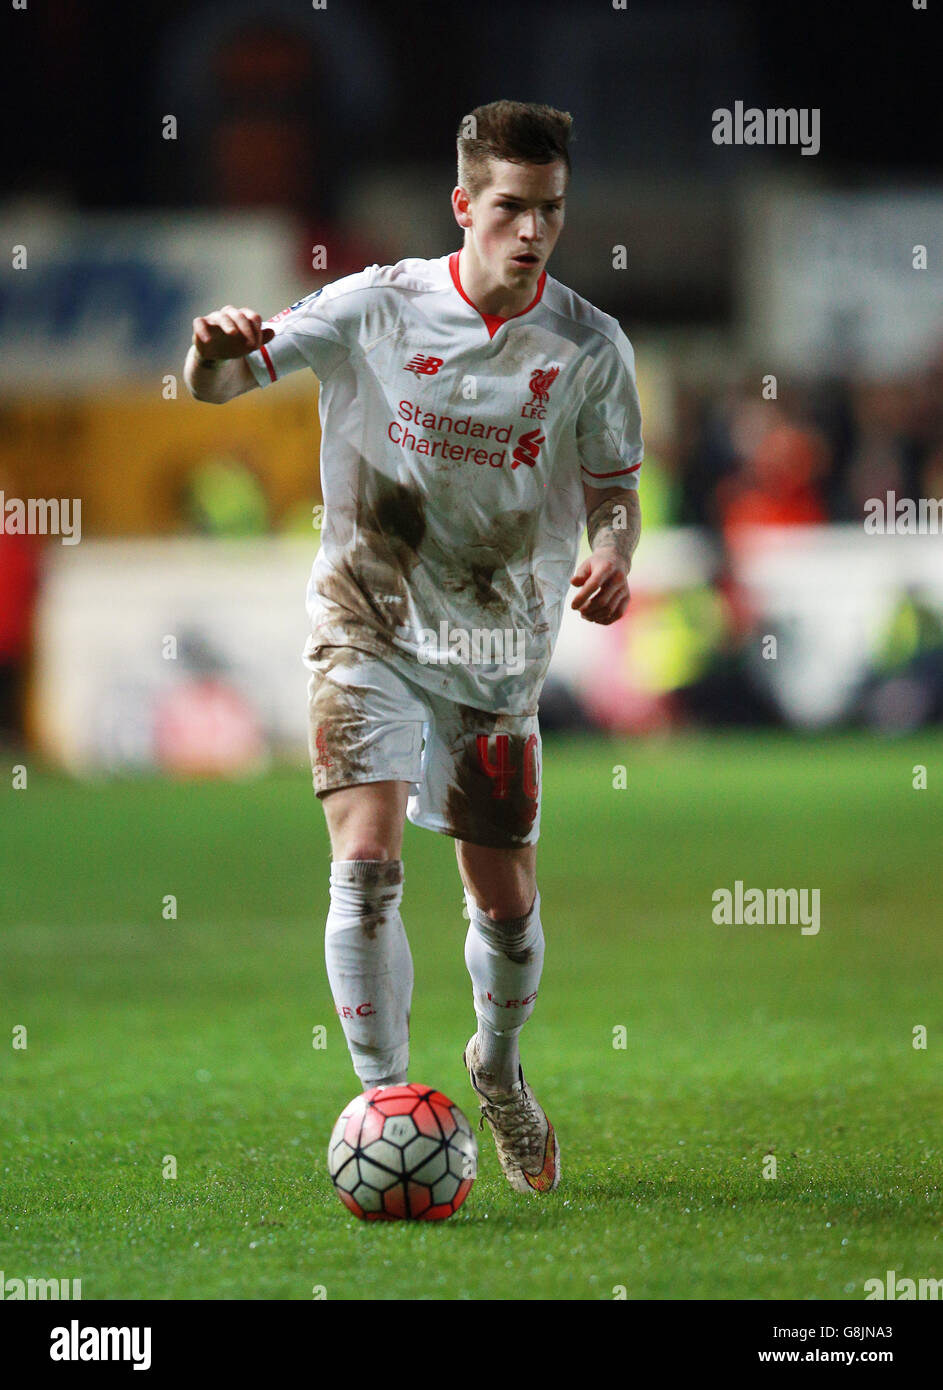 Exeter City v Liverpool - Emirates FA Cup - Third Round - St James Park. Liverpool's Ryan Kent during the Emirates FA Cup, third round match at St James Park, Exeter. Stock Photo